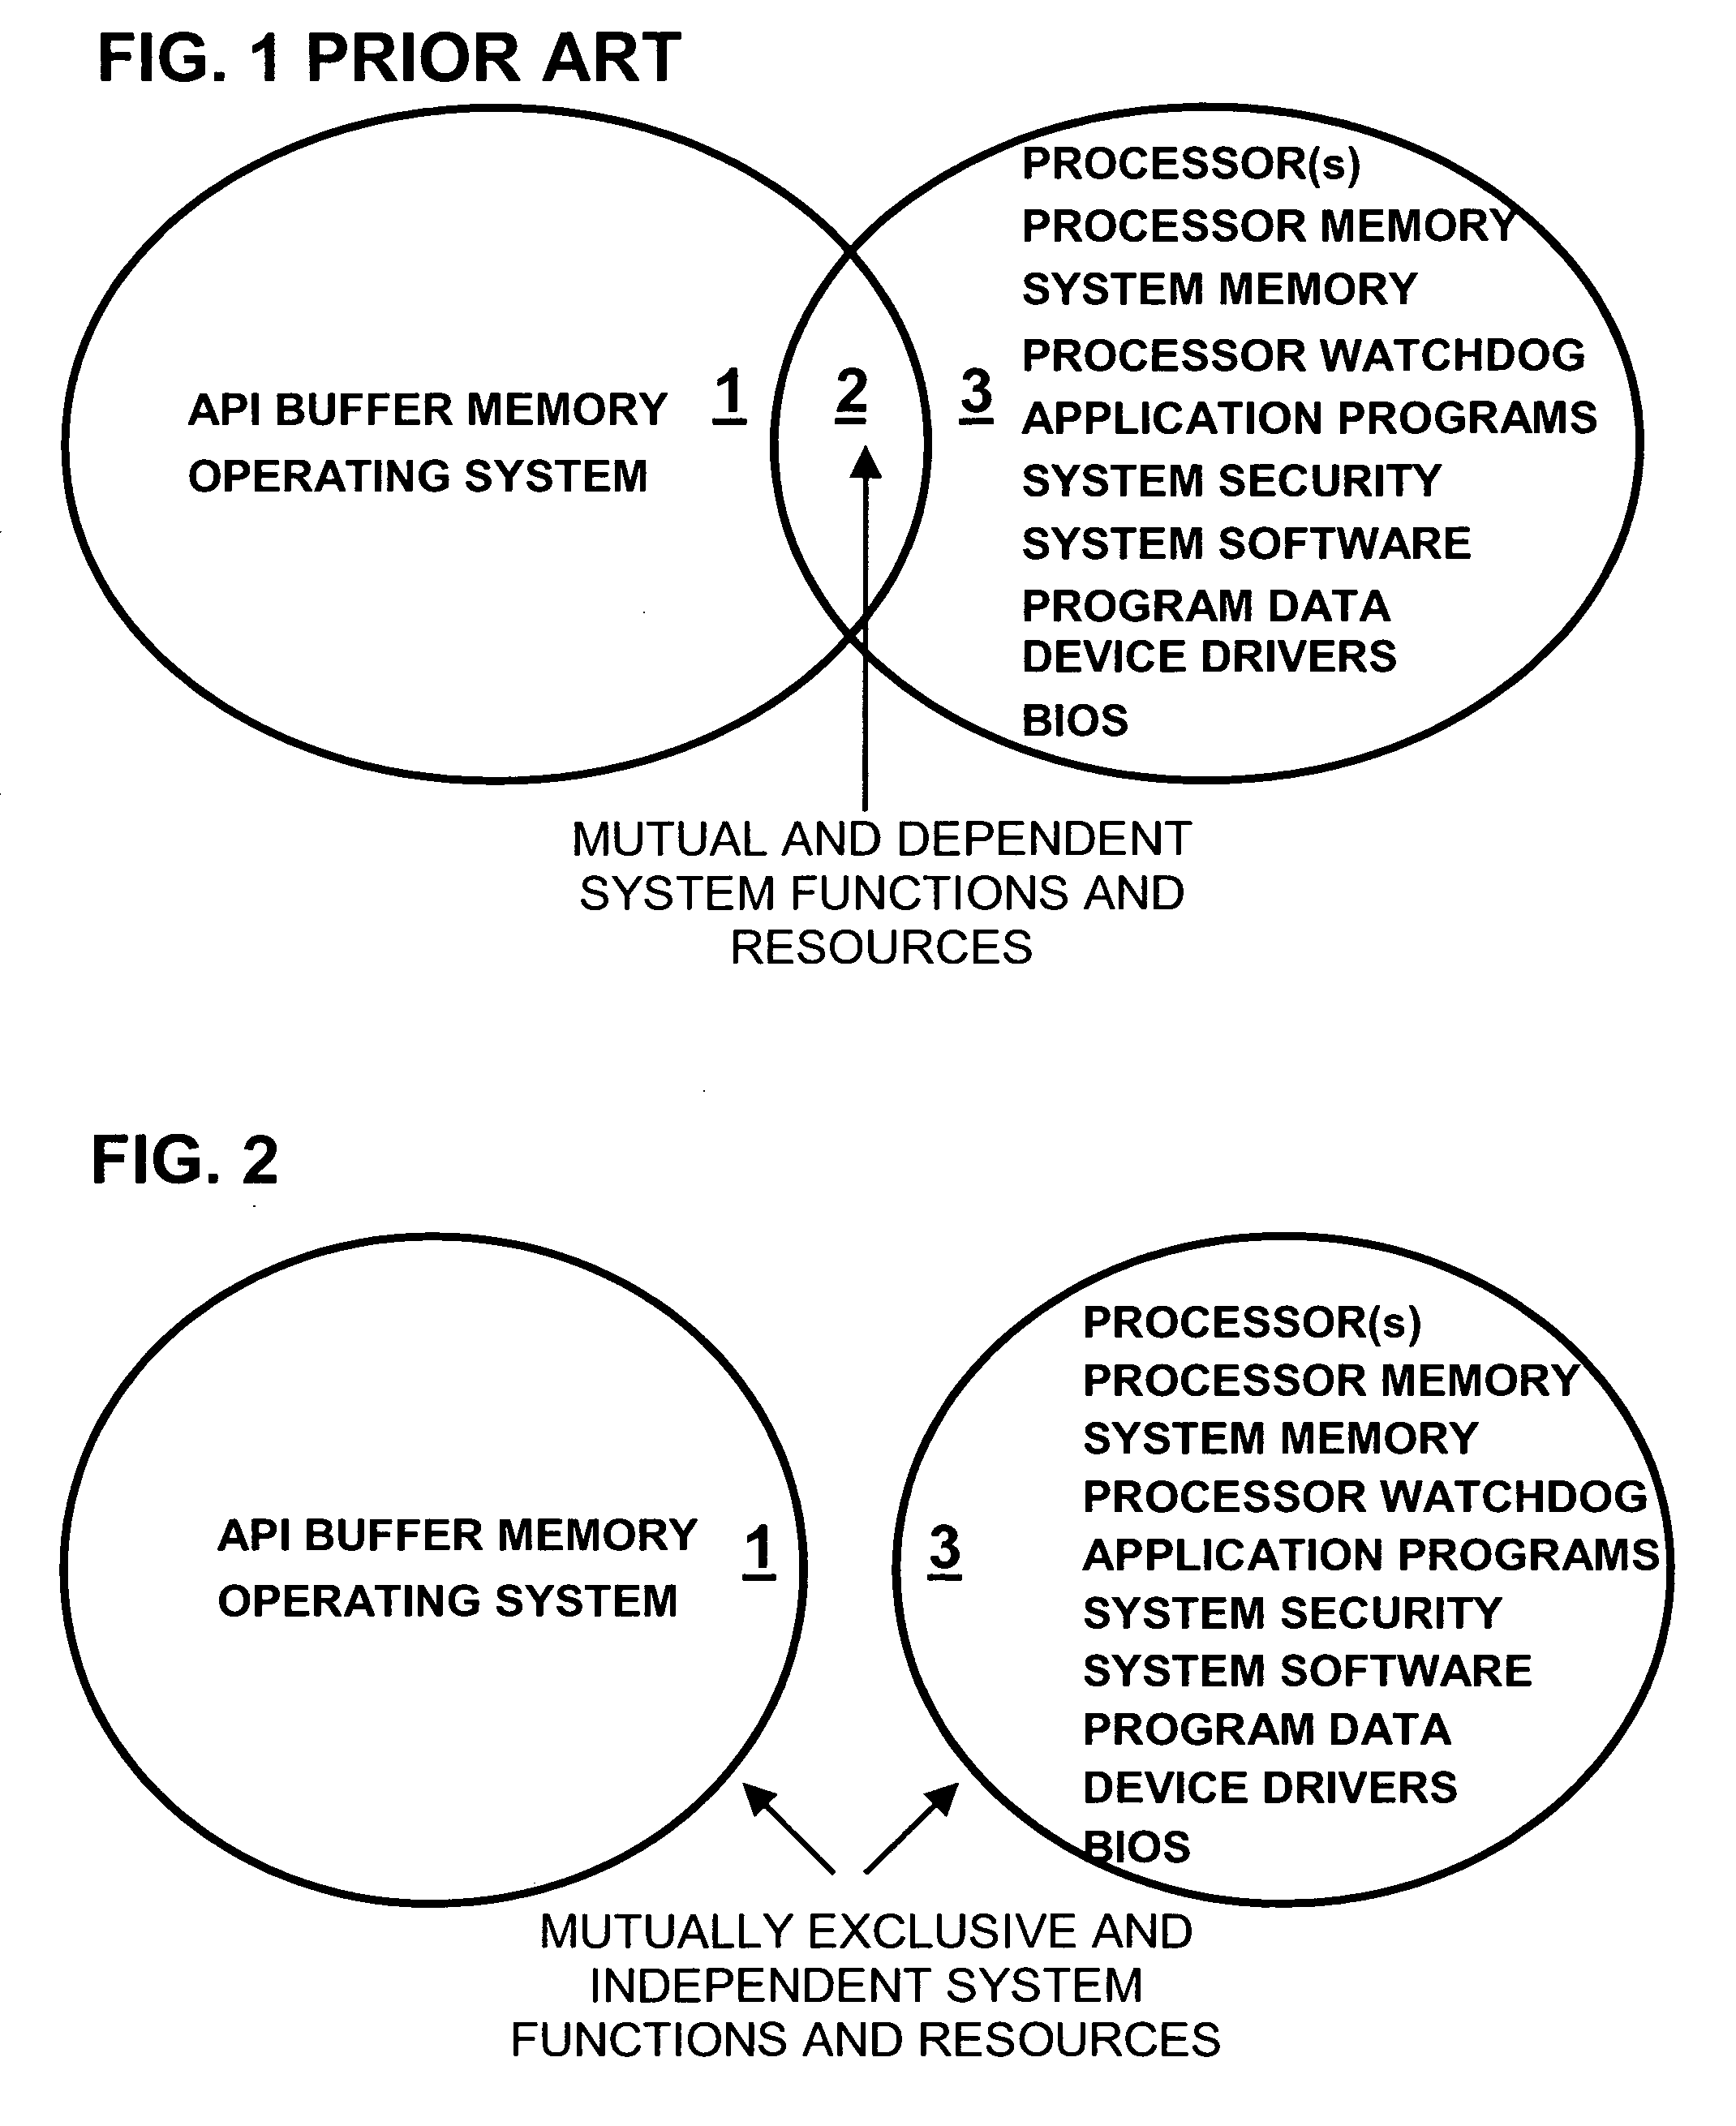 Controller and resource management system and method with improved security for independently controlling and managing a computer system